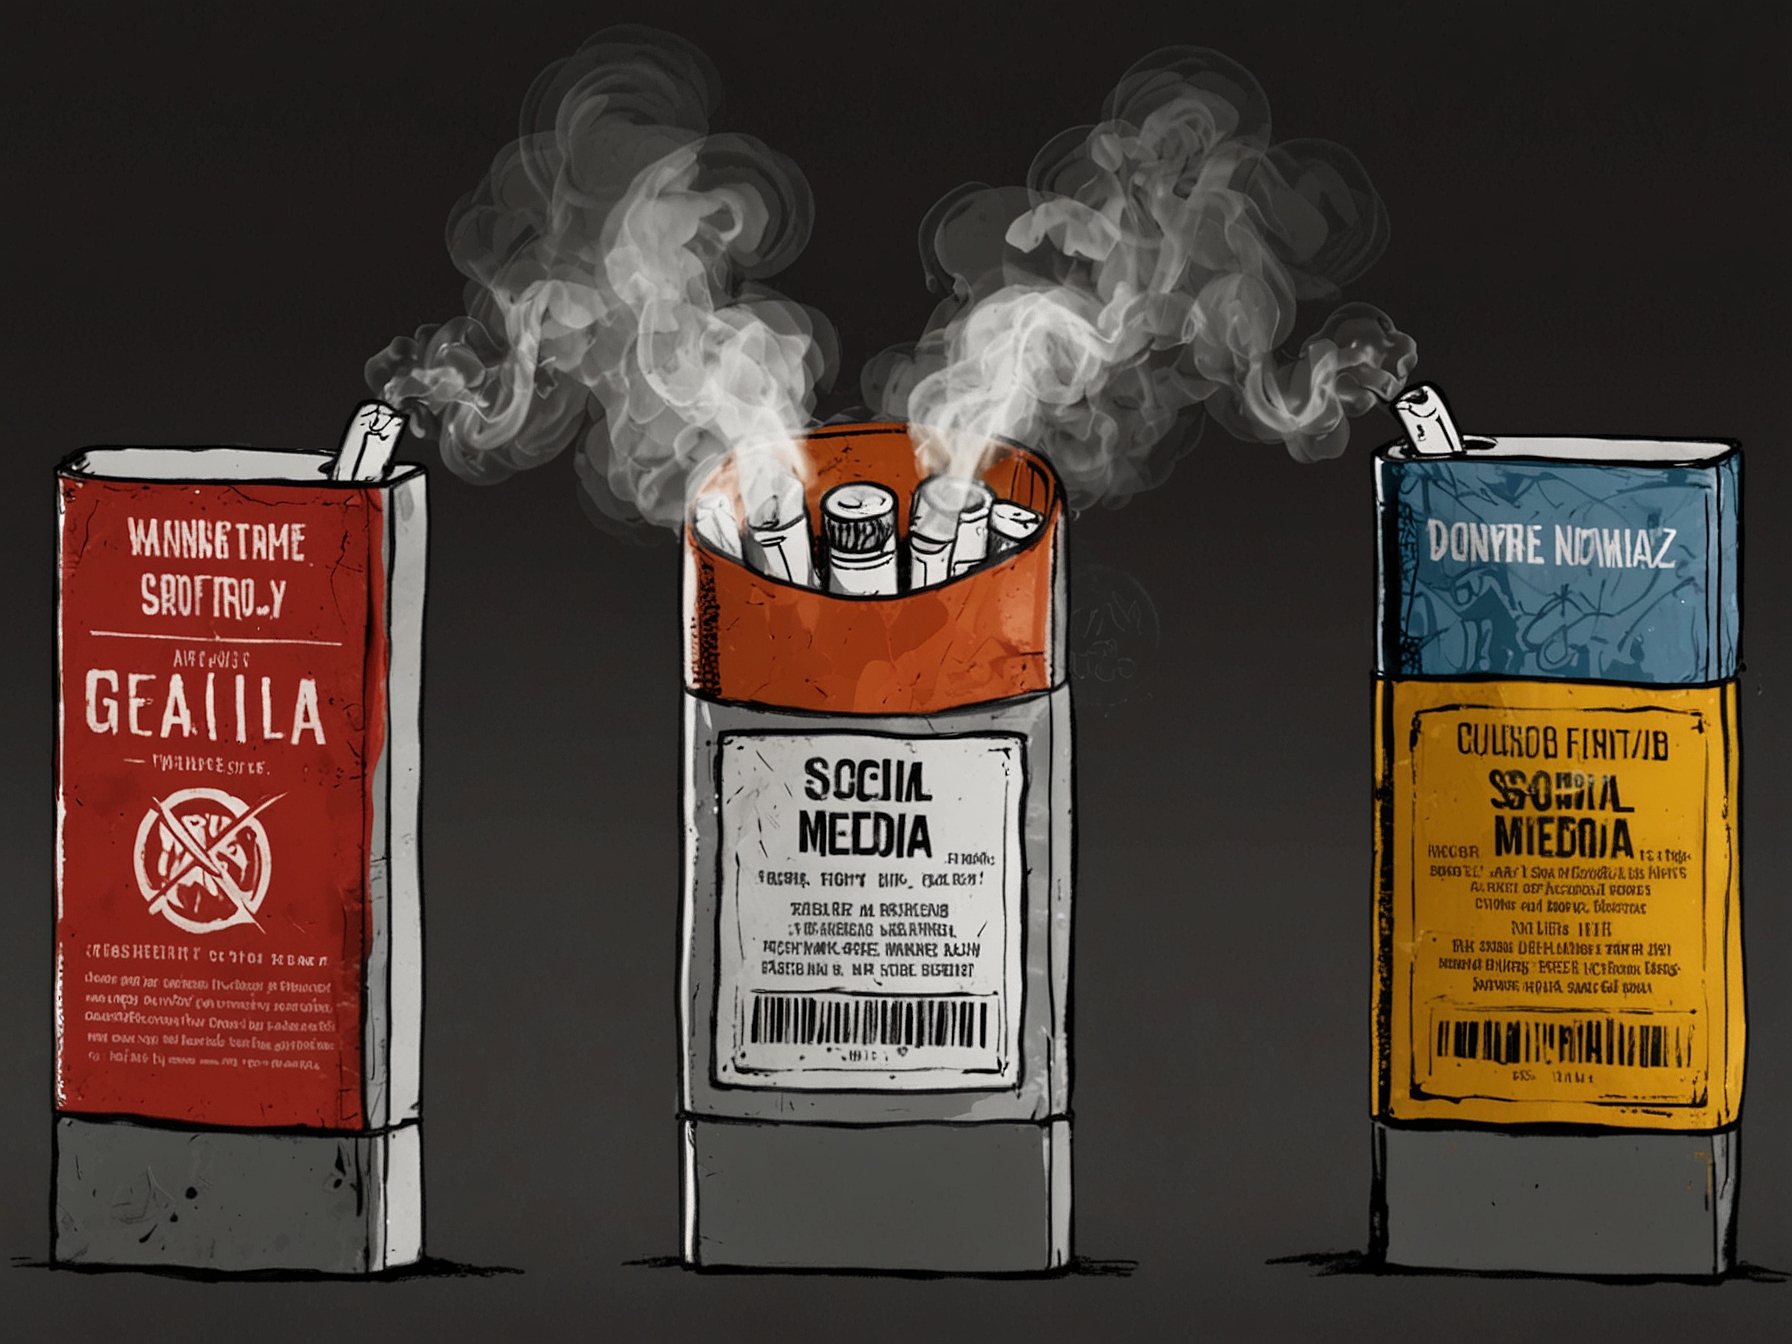 Graphic comparing cigarette warning labels to proposed social media warnings, emphasizing the similarities in addressing public health concerns and fostering awareness.